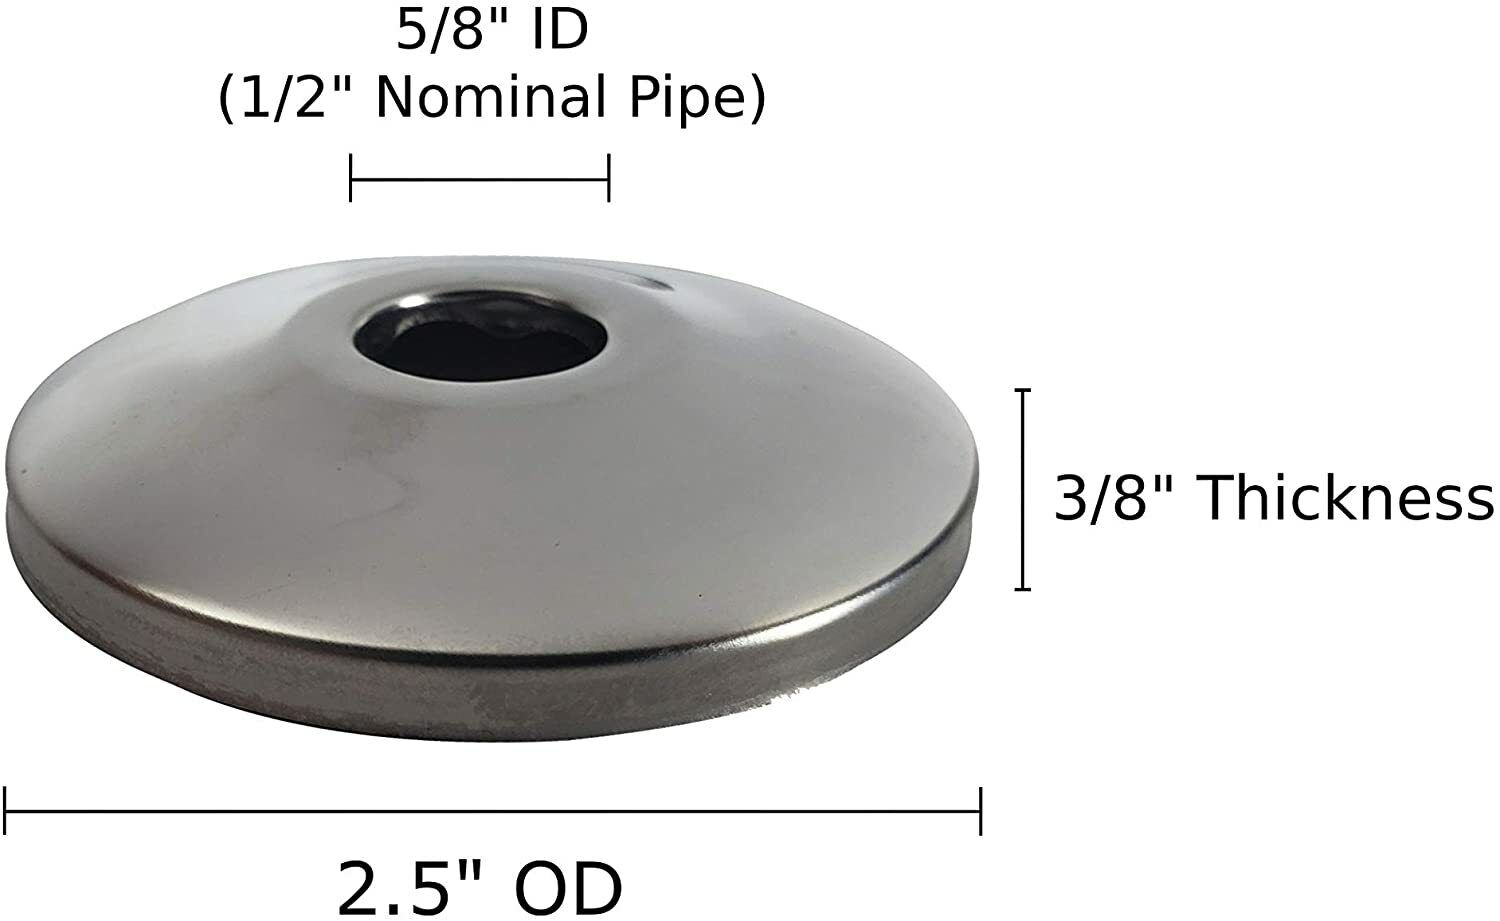 Escutcheon Stainless Steel Chrome Plated Flange Cover 1/2 in. copper tube size flange 5/8" OD for CPVC Pipe Copper (25 pieces)